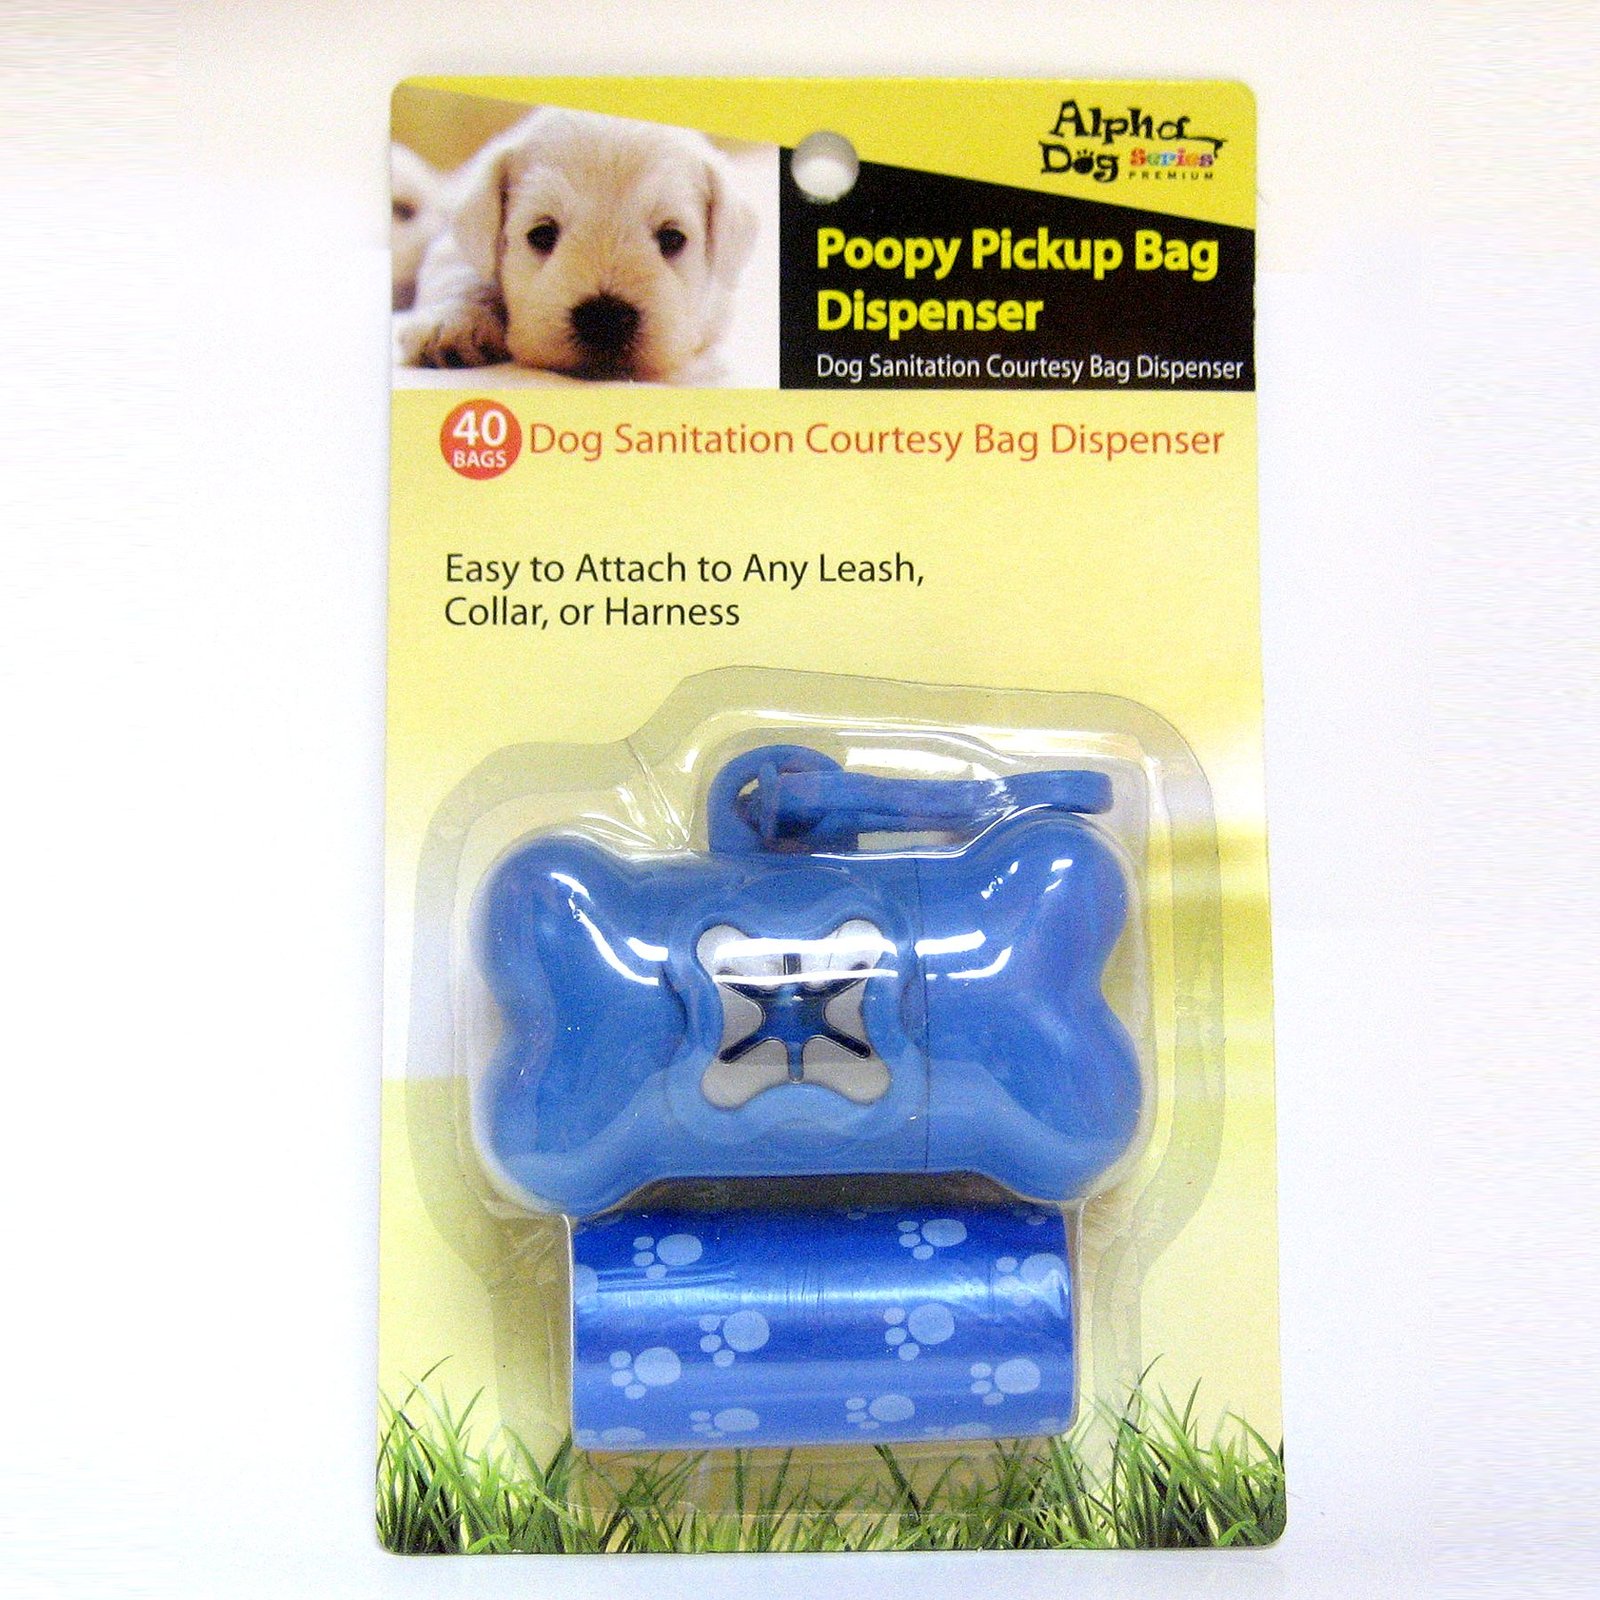 Alpha Dog Series Poopy Pick up Dispenser 40bags-6pack & Refill Pack 80bags - 6pa - $36.00